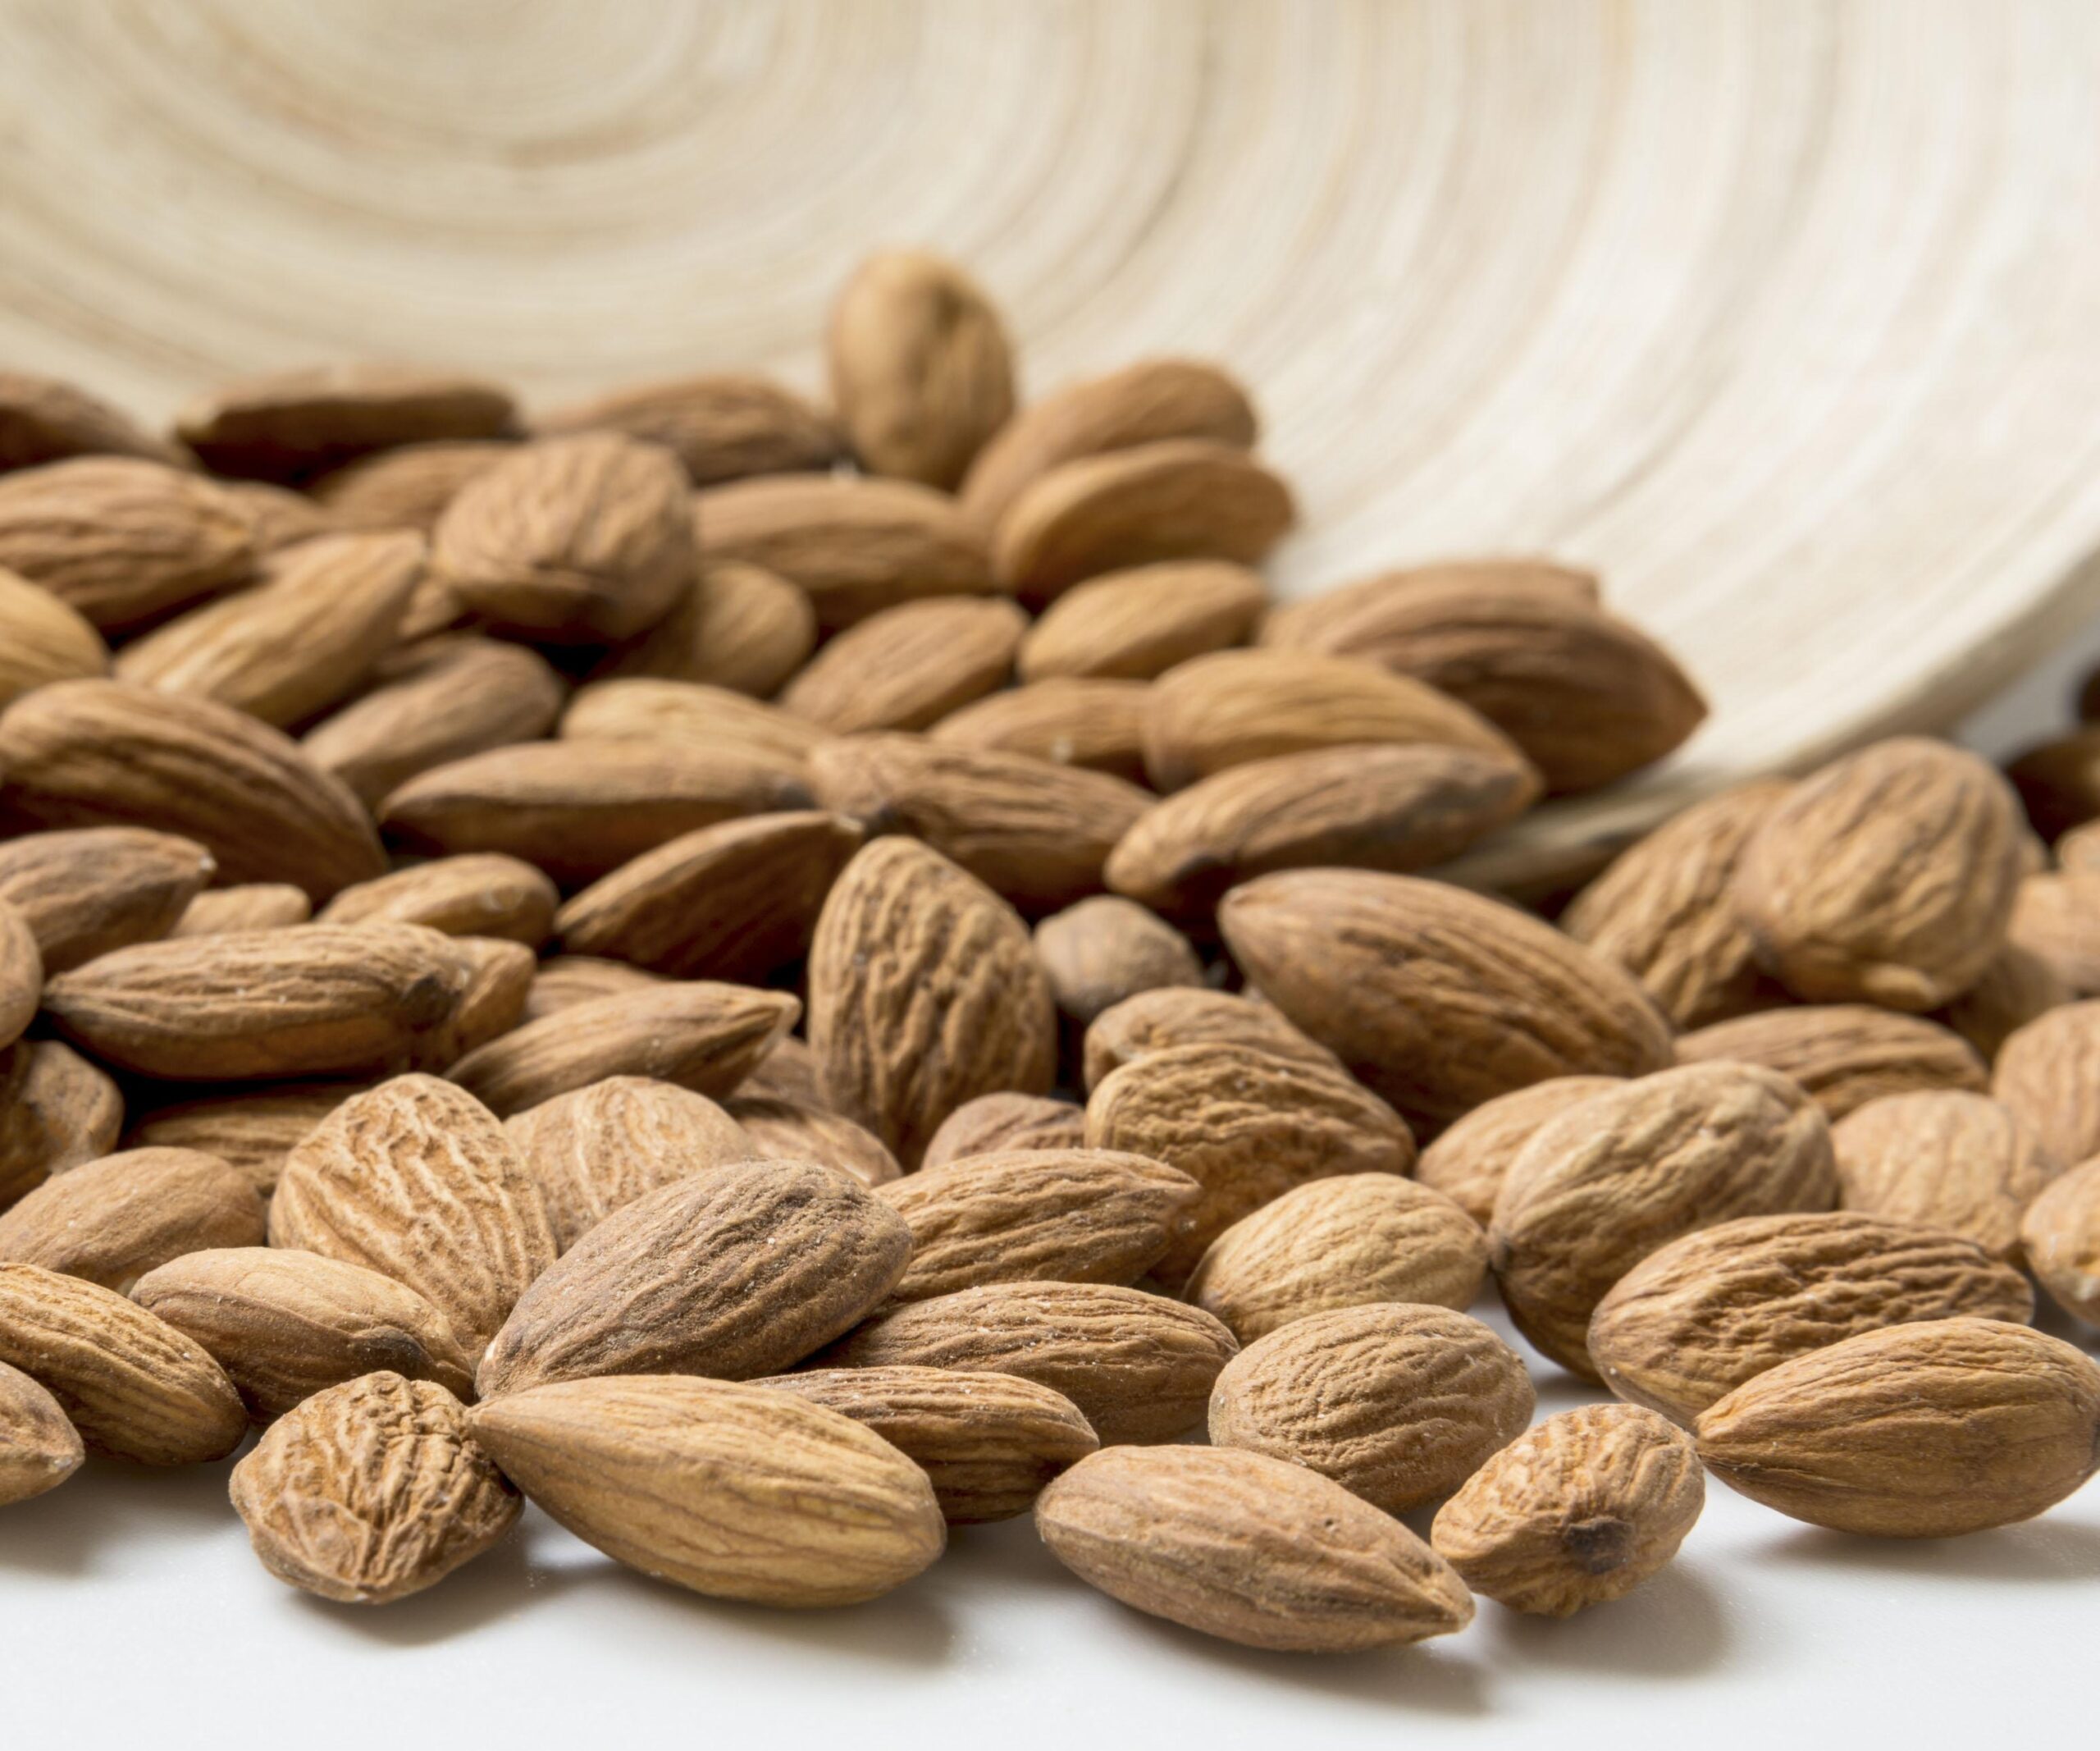 Eating just a handful of almonds could give your health a boost